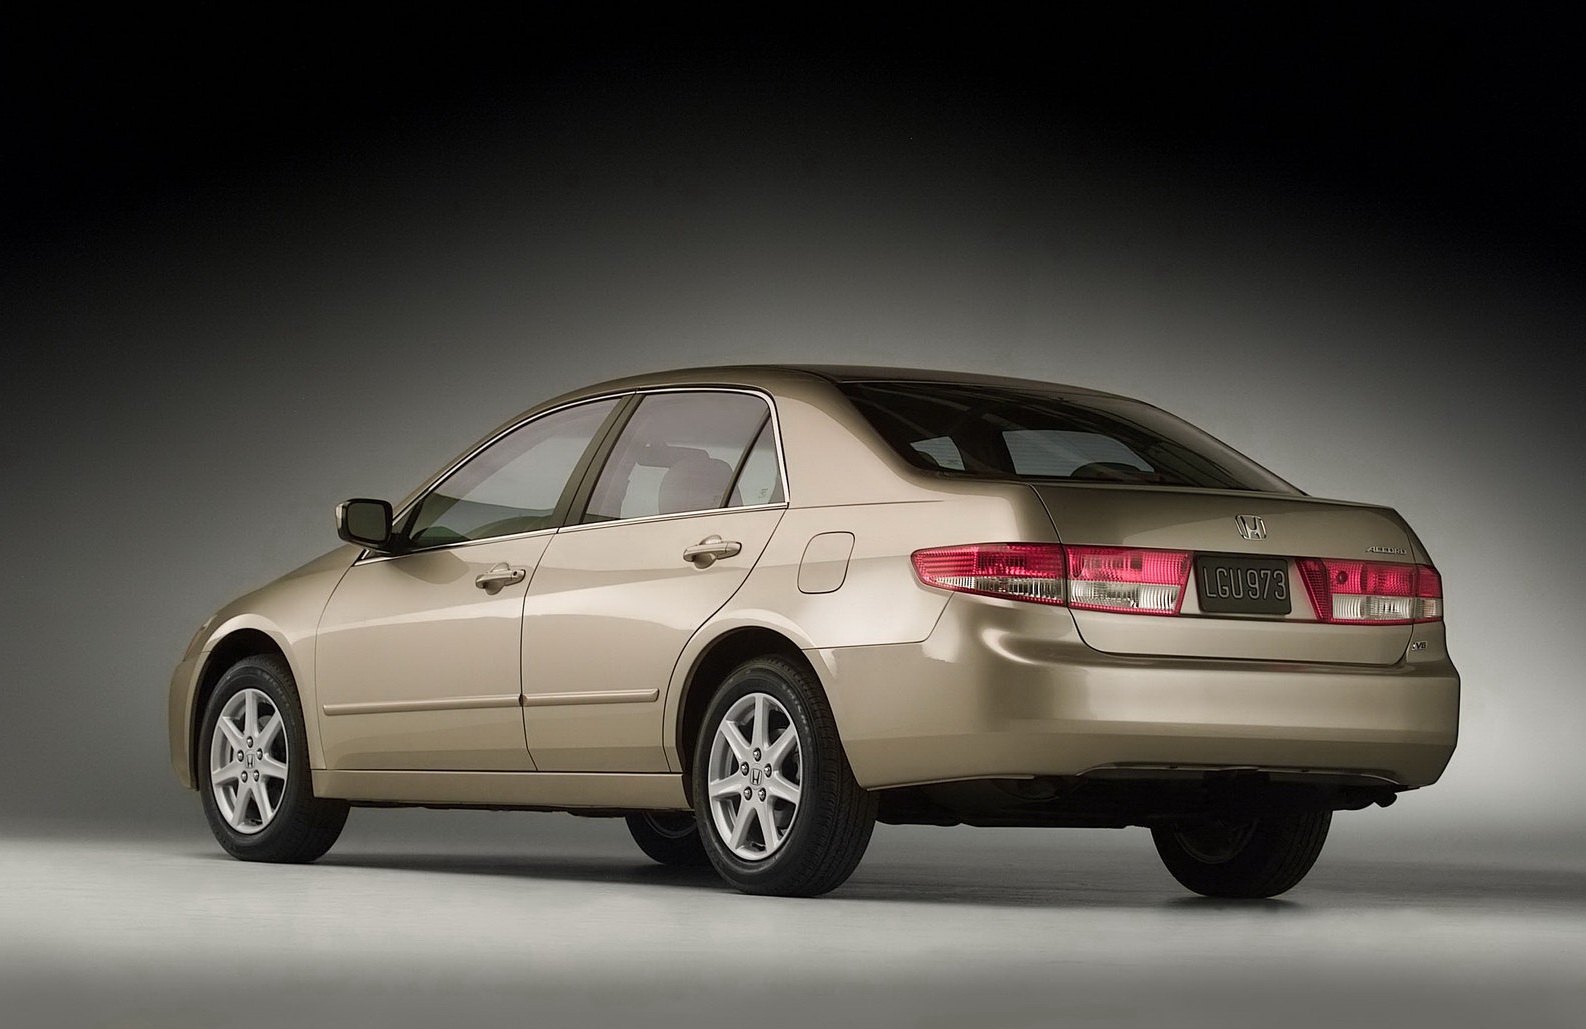 Honda Accord CL9 Price in Pakistan, Specification & Features | PakWheels